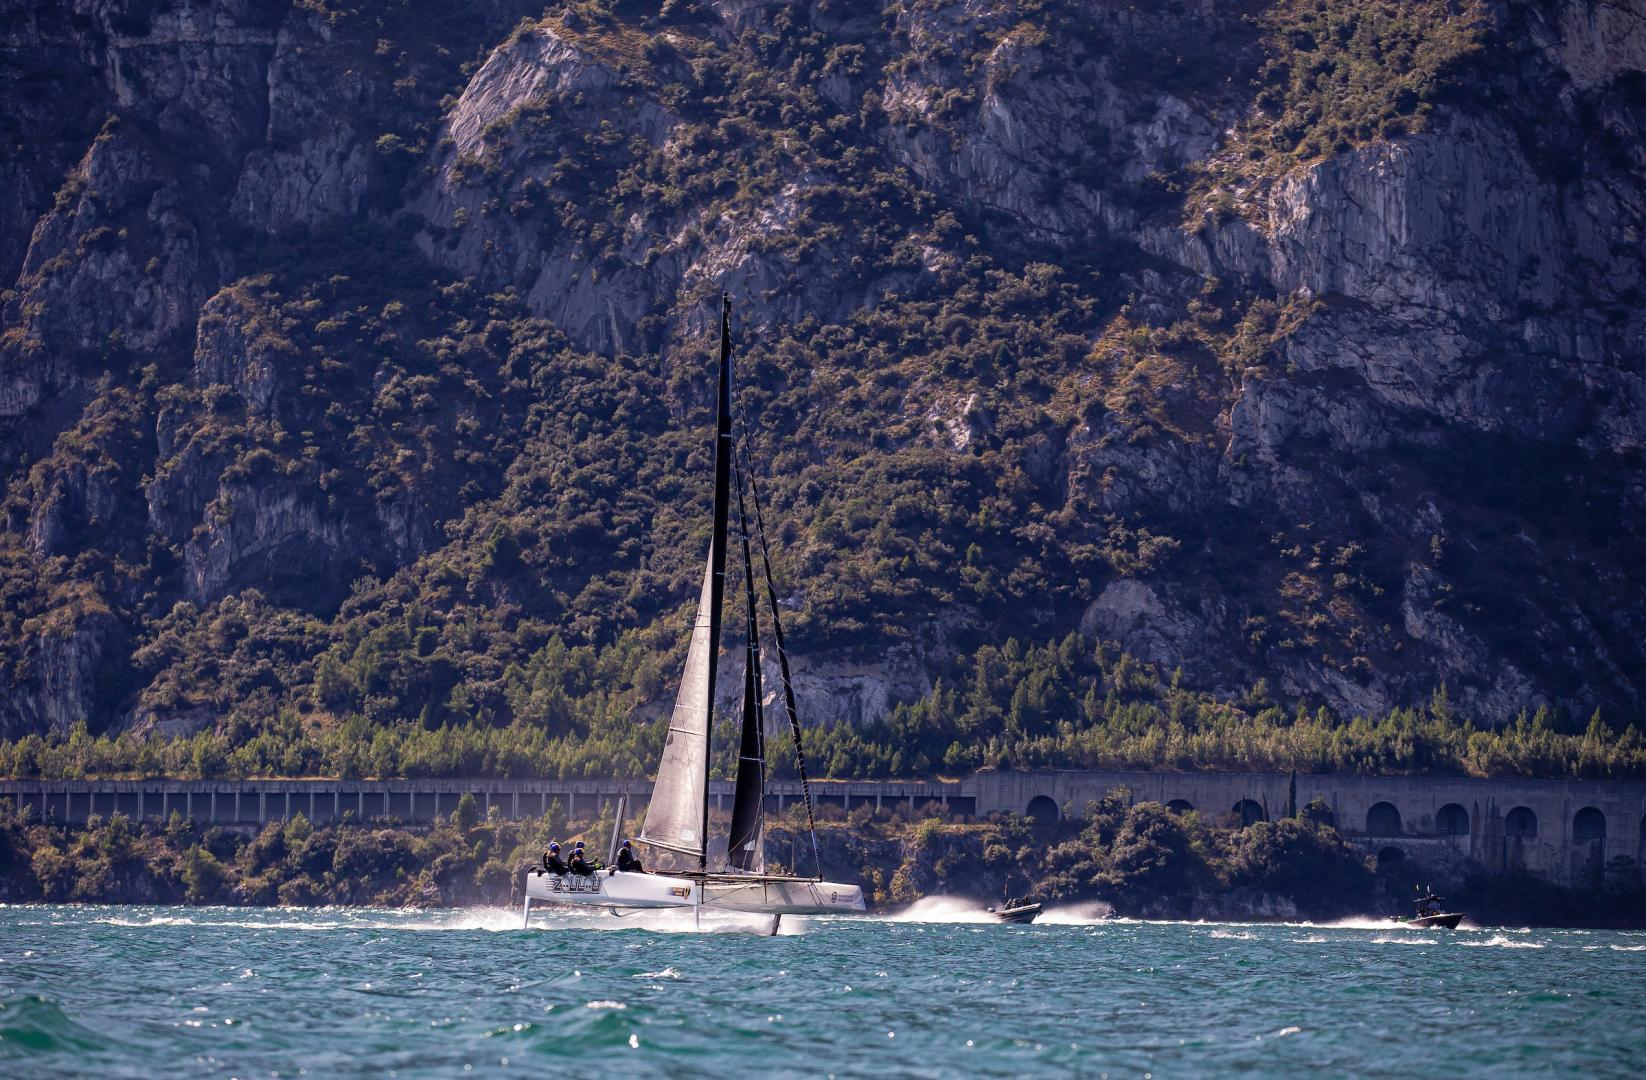 Racing next to Lake Garda's famous Quantum of Solace car chase road. Photo: Sailing Energy / GC32 Racing Tour